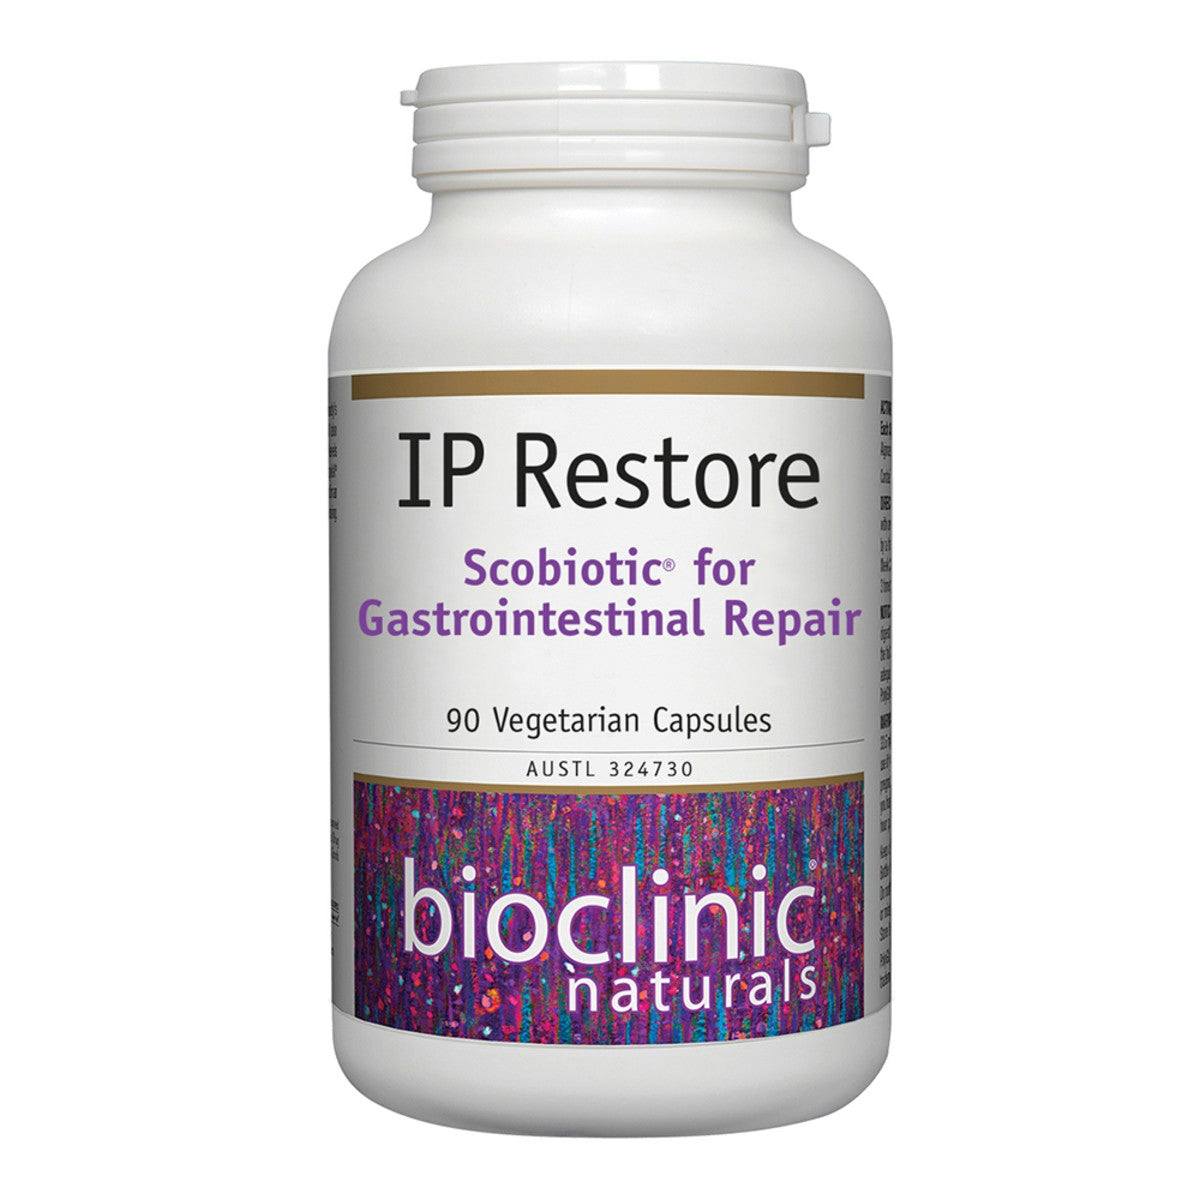 Image of Bioclinic Naturals IP restore 90vc with a white background